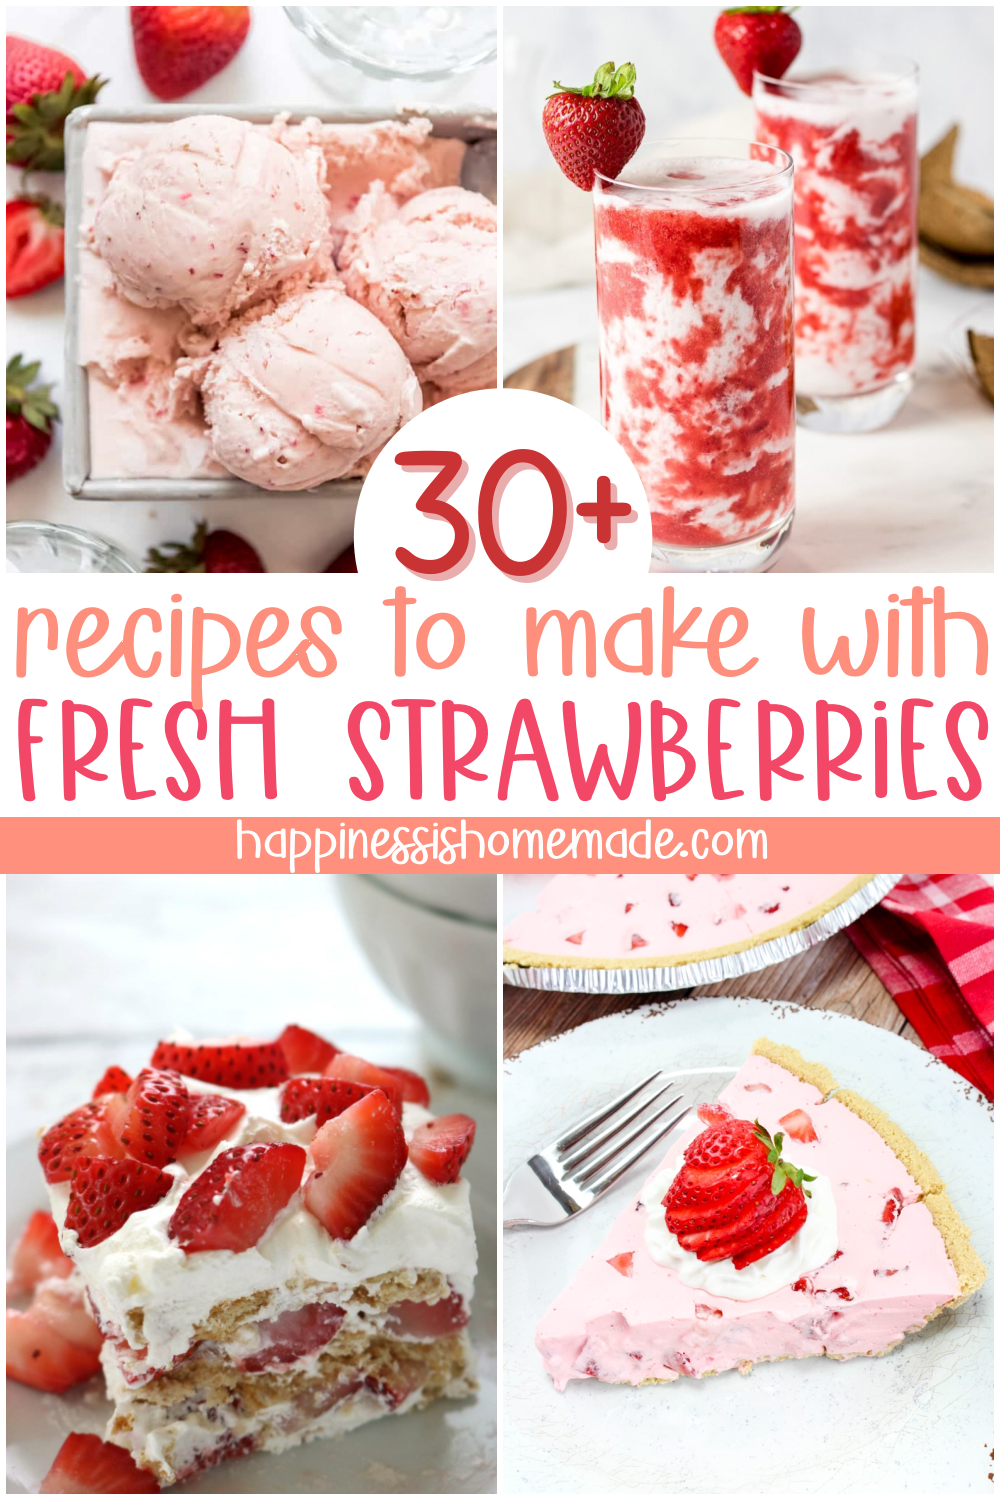 30+ recipes to make with fresh strawberries